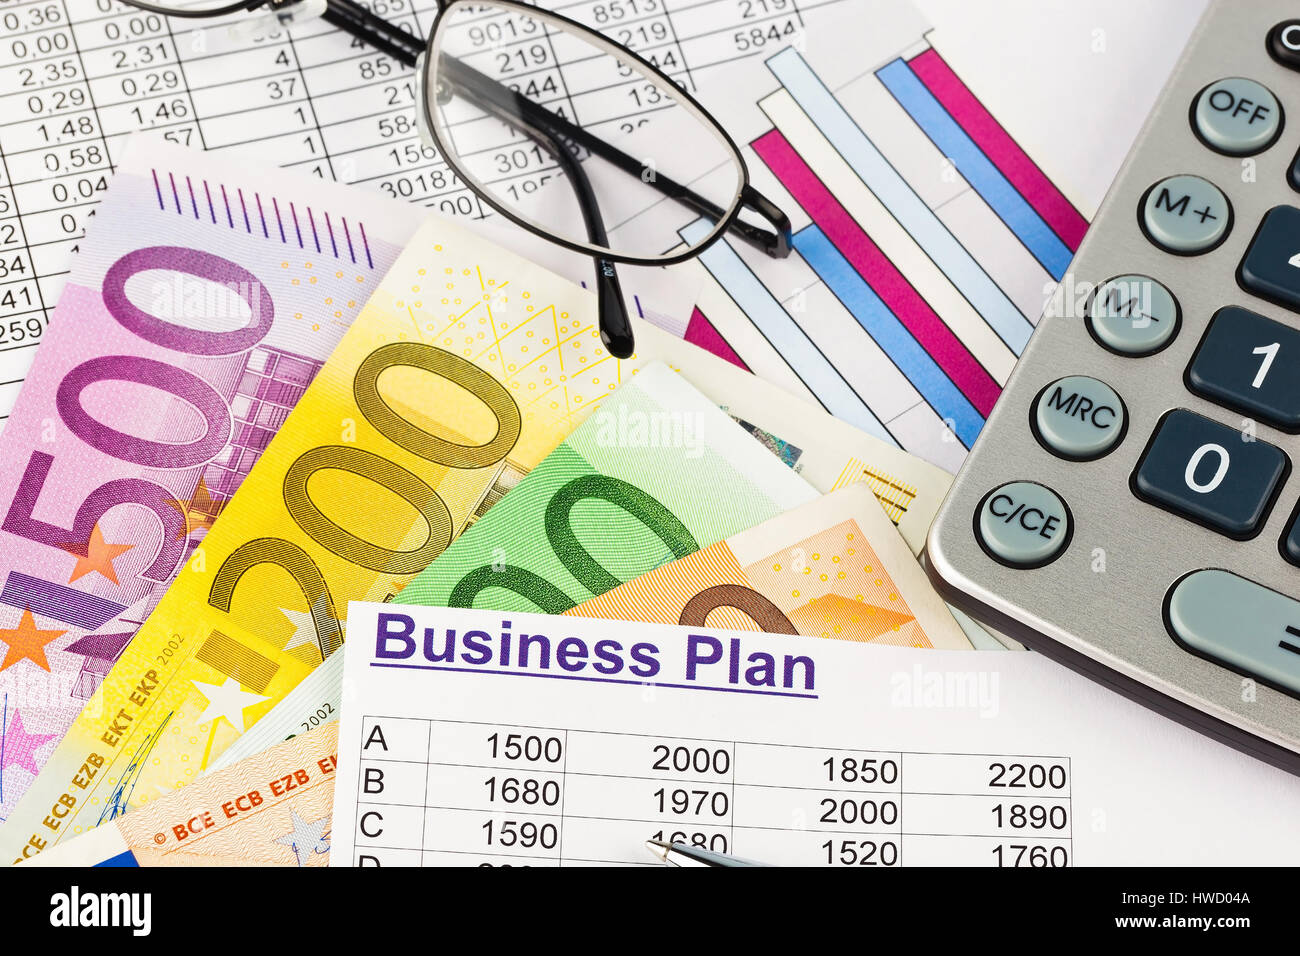 A business plan for the foundation of an enterprise. Ideas and strategies for the enterprise foundation. Eurobank notes and pocket calculators, Ein Bu Stock Photo